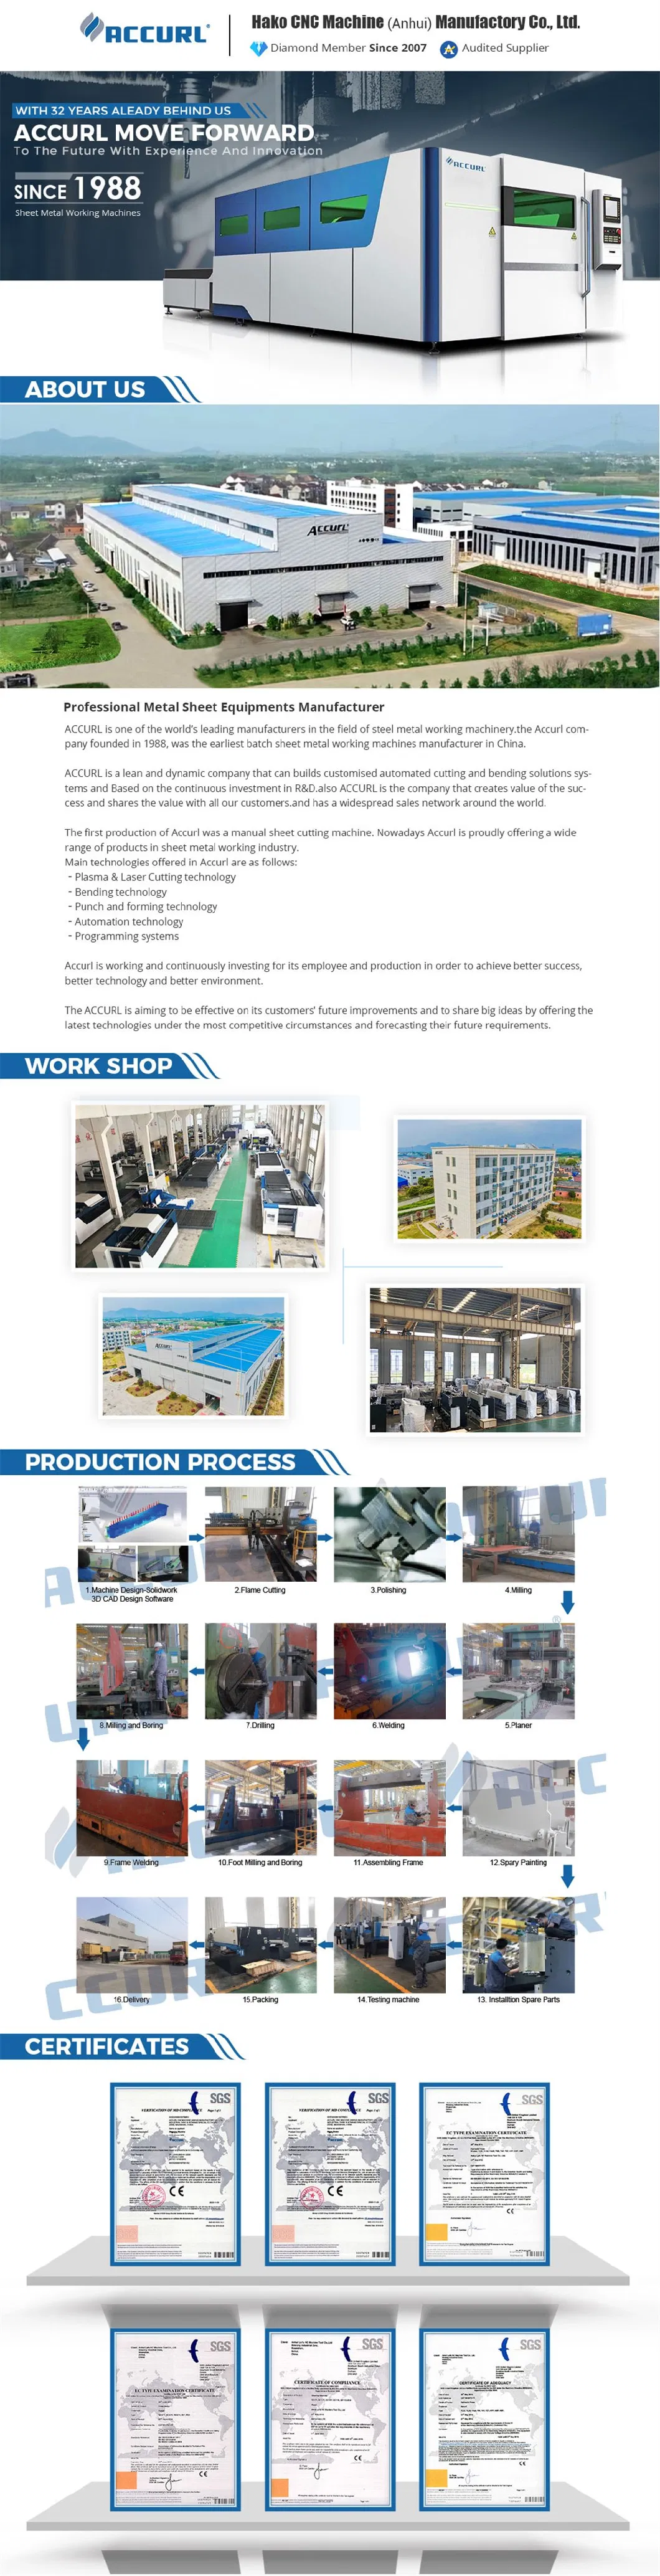 CE Standard Certificate 63tons Glass Fiber Reinforced Plastic Products of Hydraulic Presses